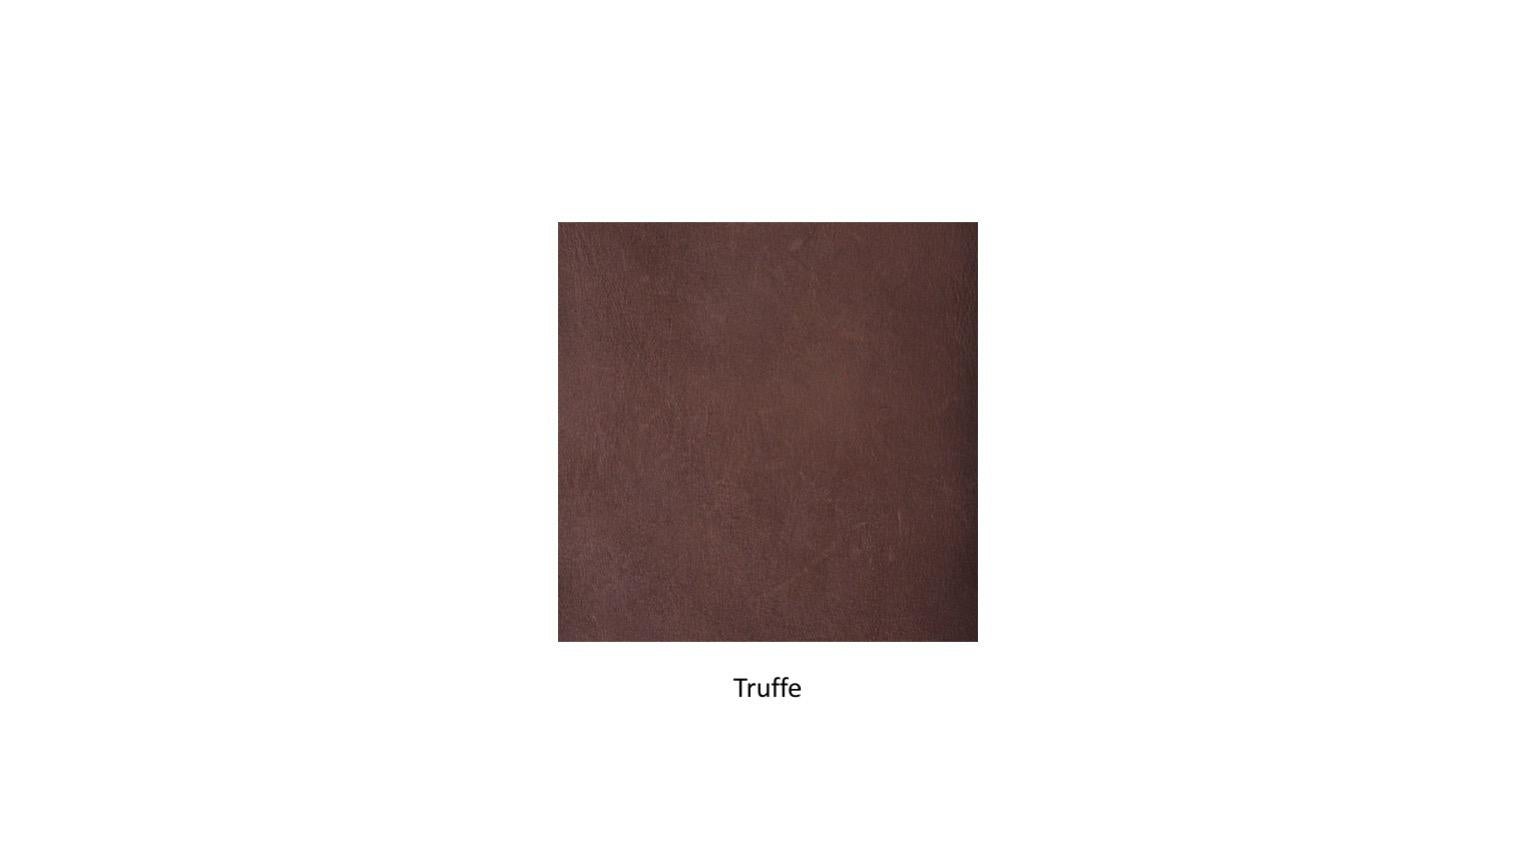 Leather samples
1x Truffe leather samples
1x Chataigne leather sample
1x Marron glace leather sample

Price is for express air freight from Thailand.

    